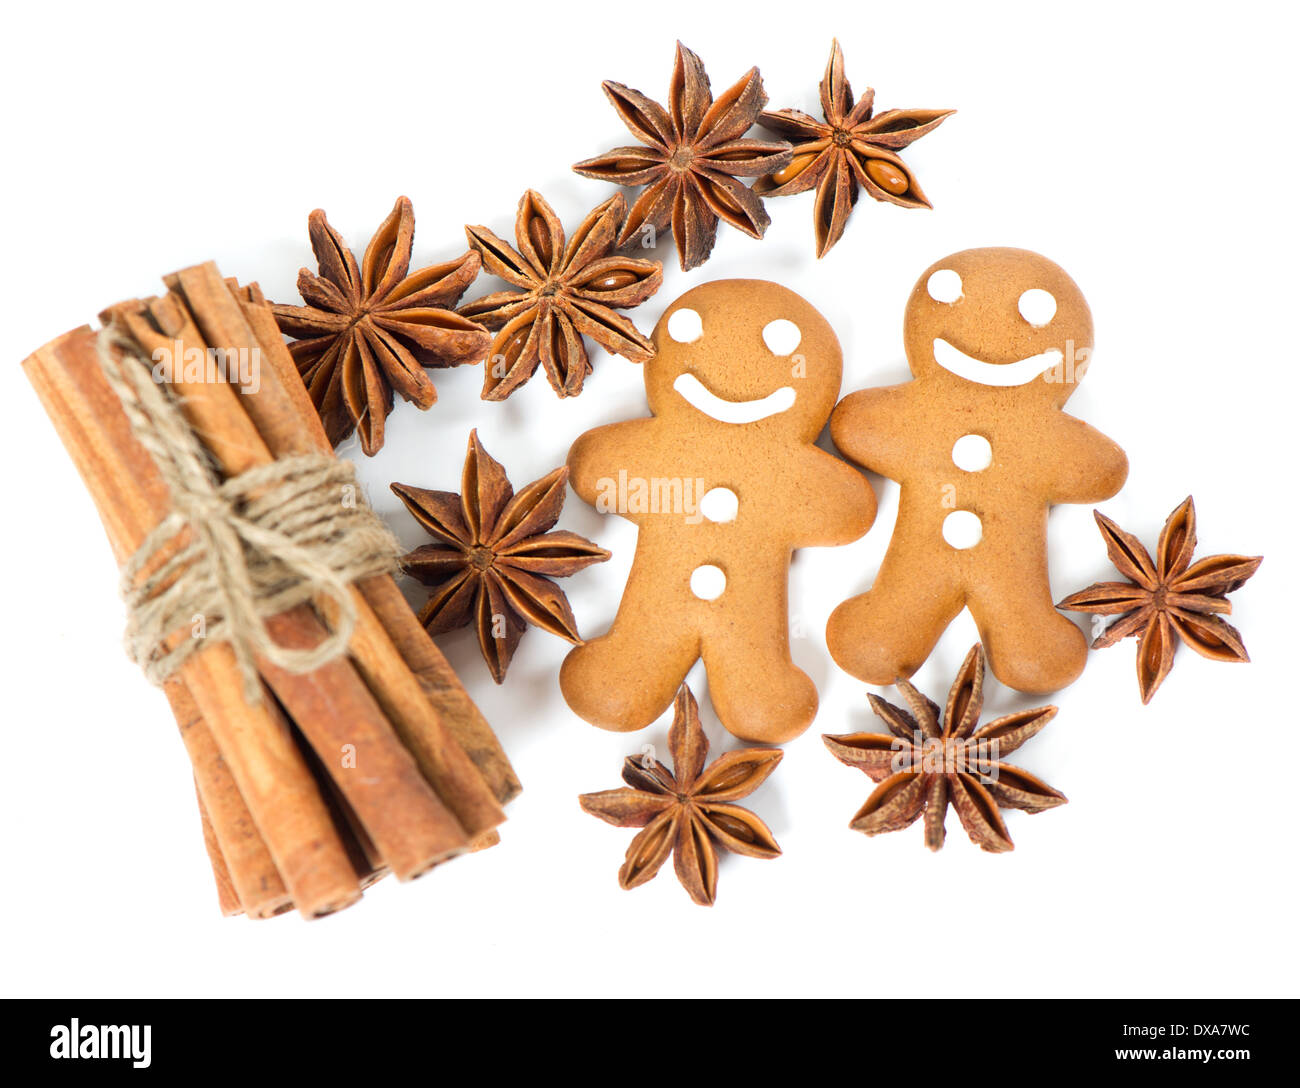 gingerbread man cookies with anise stars and cinnamon sticks. selective focus Stock Photo